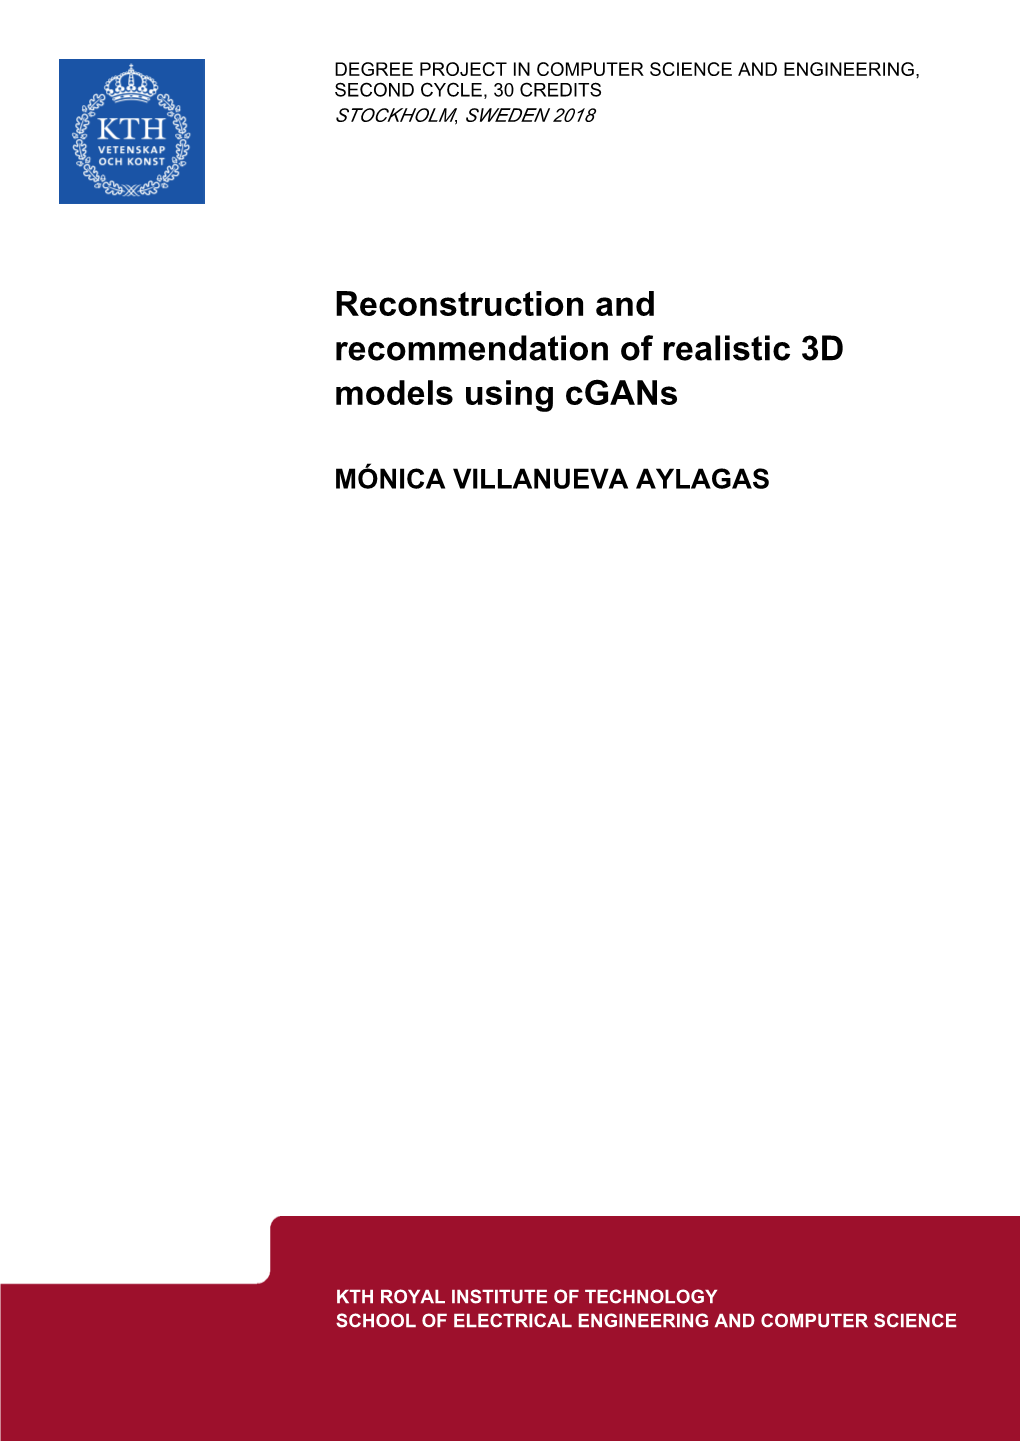 Reconstruction and Recommendation of Realistic 3D Models Using Cgans